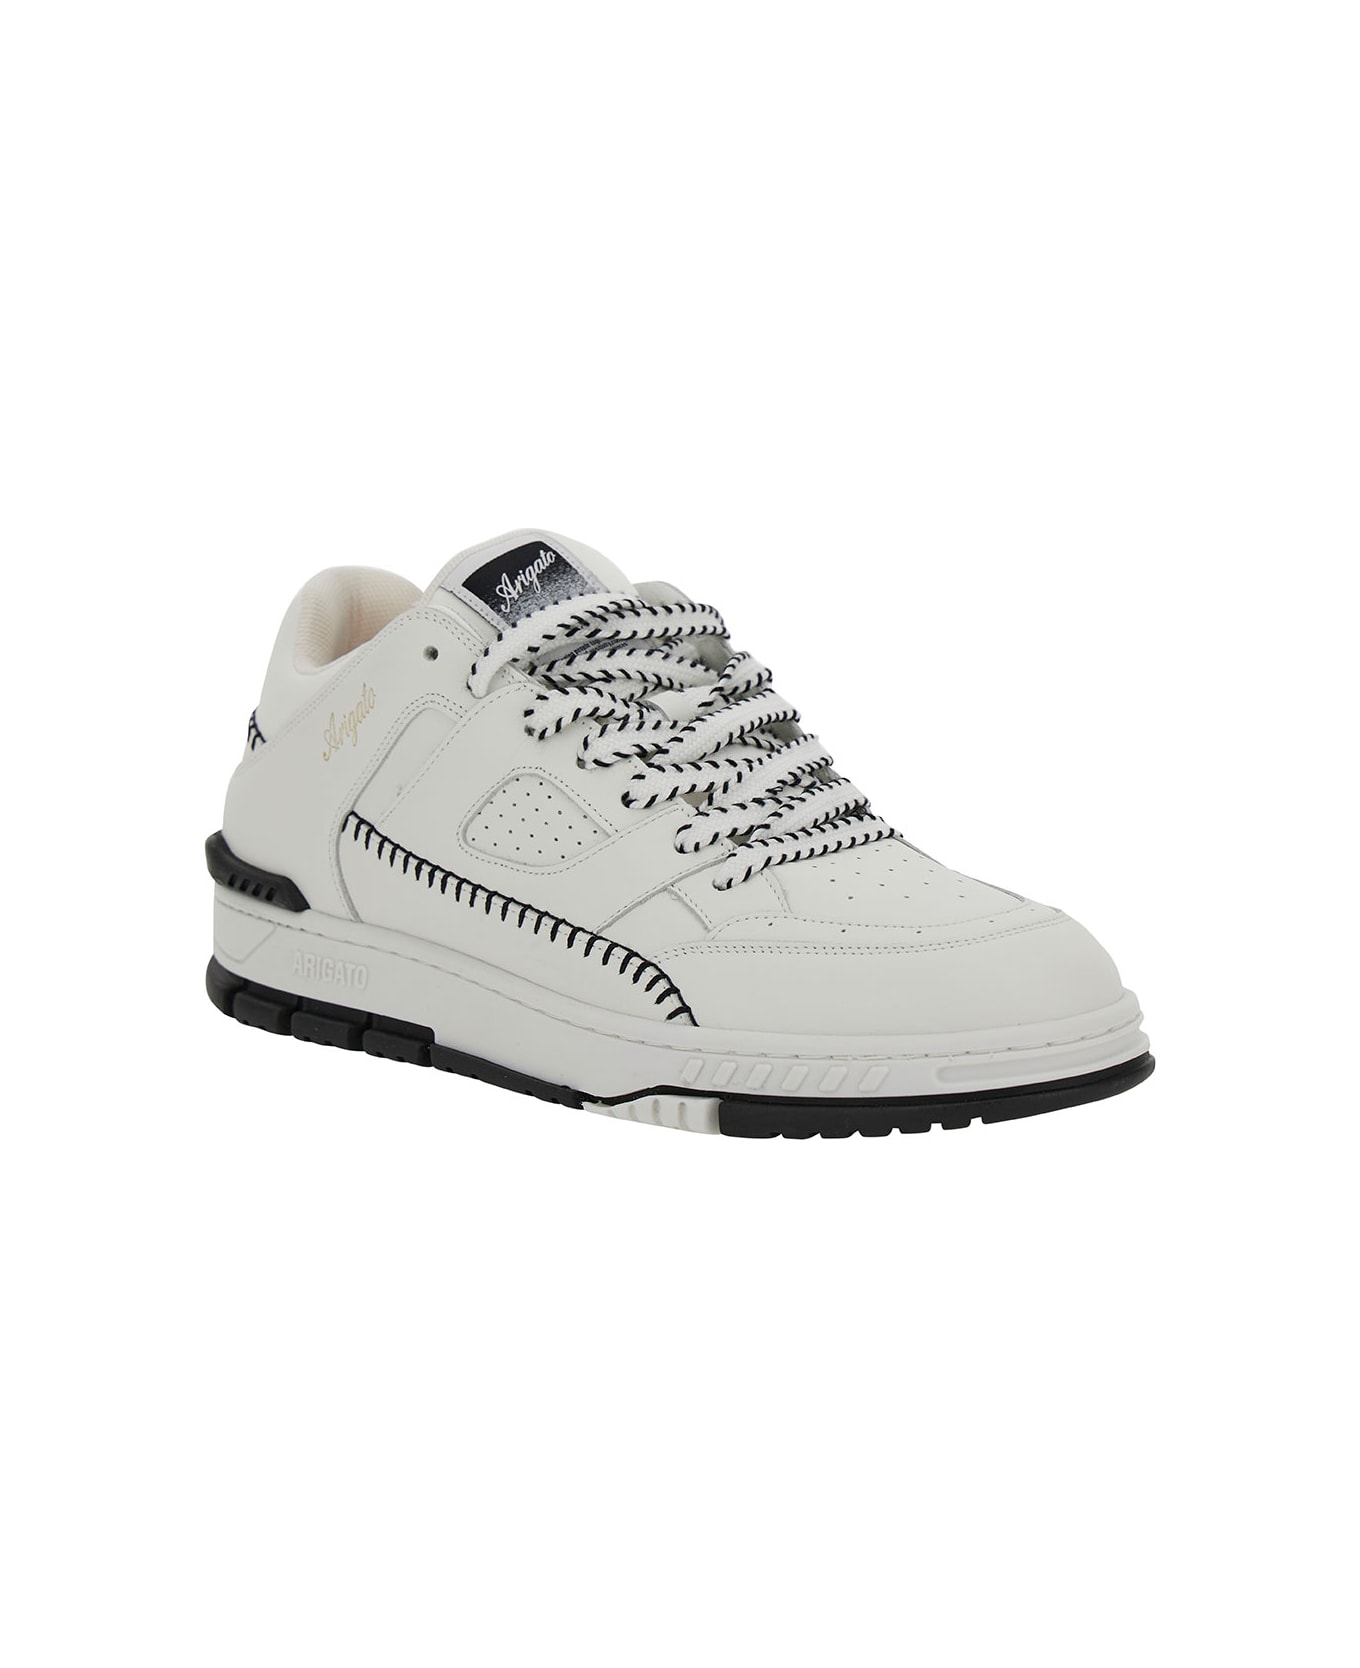 Axel Arigato 'area Lo Sneaker Stitch' White Low Top Sneakers With Contrasting Stitch Detail In Leather Man - White スニーカー